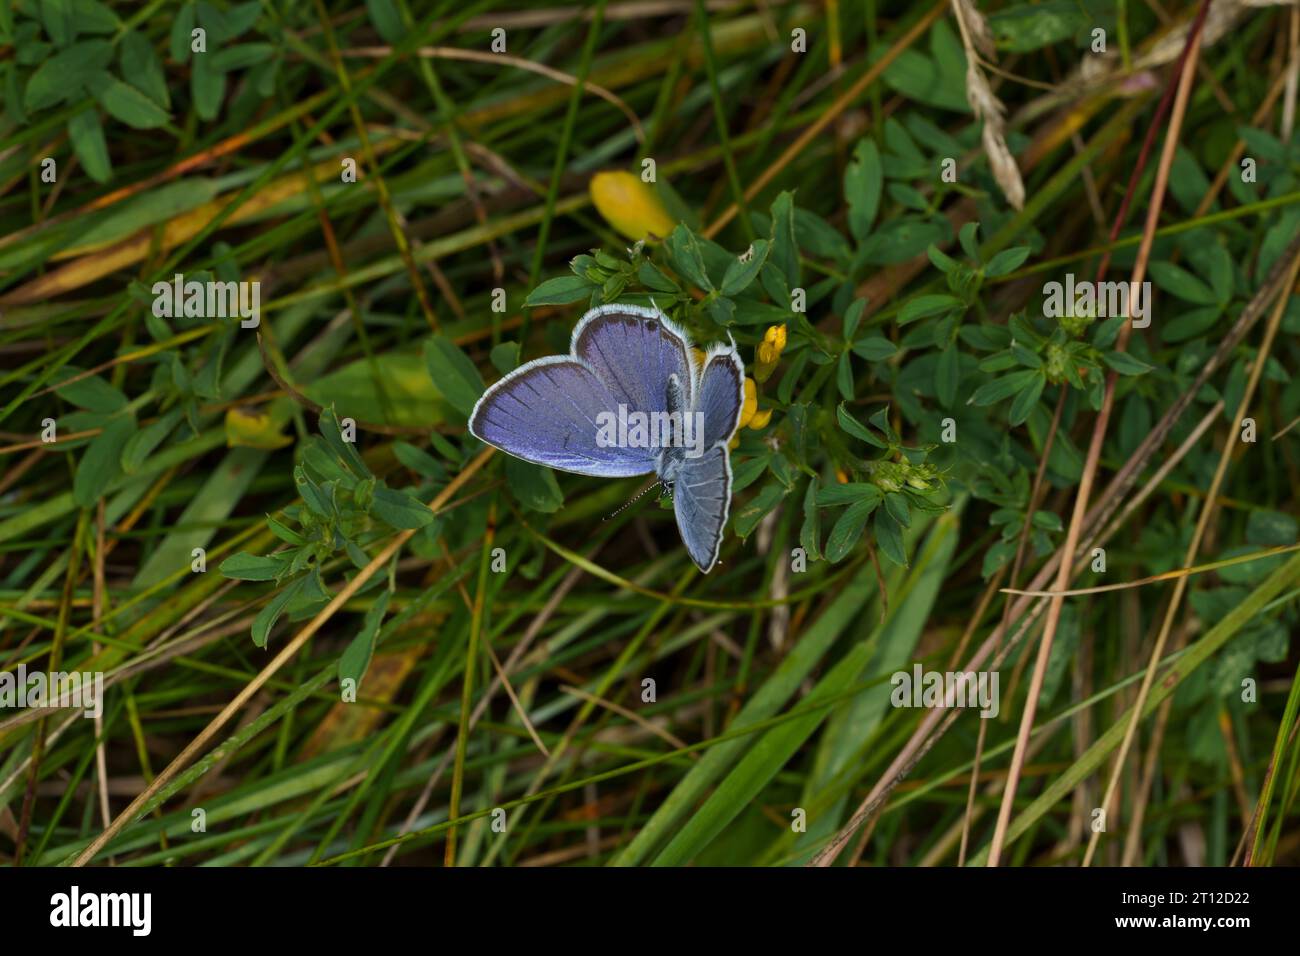 Everes argiades Family Lycaenidae Genus Cupido Tailed Cupid Short-tailed blue butterfly wild nature insect photography, picture, wallpaper Stock Photo